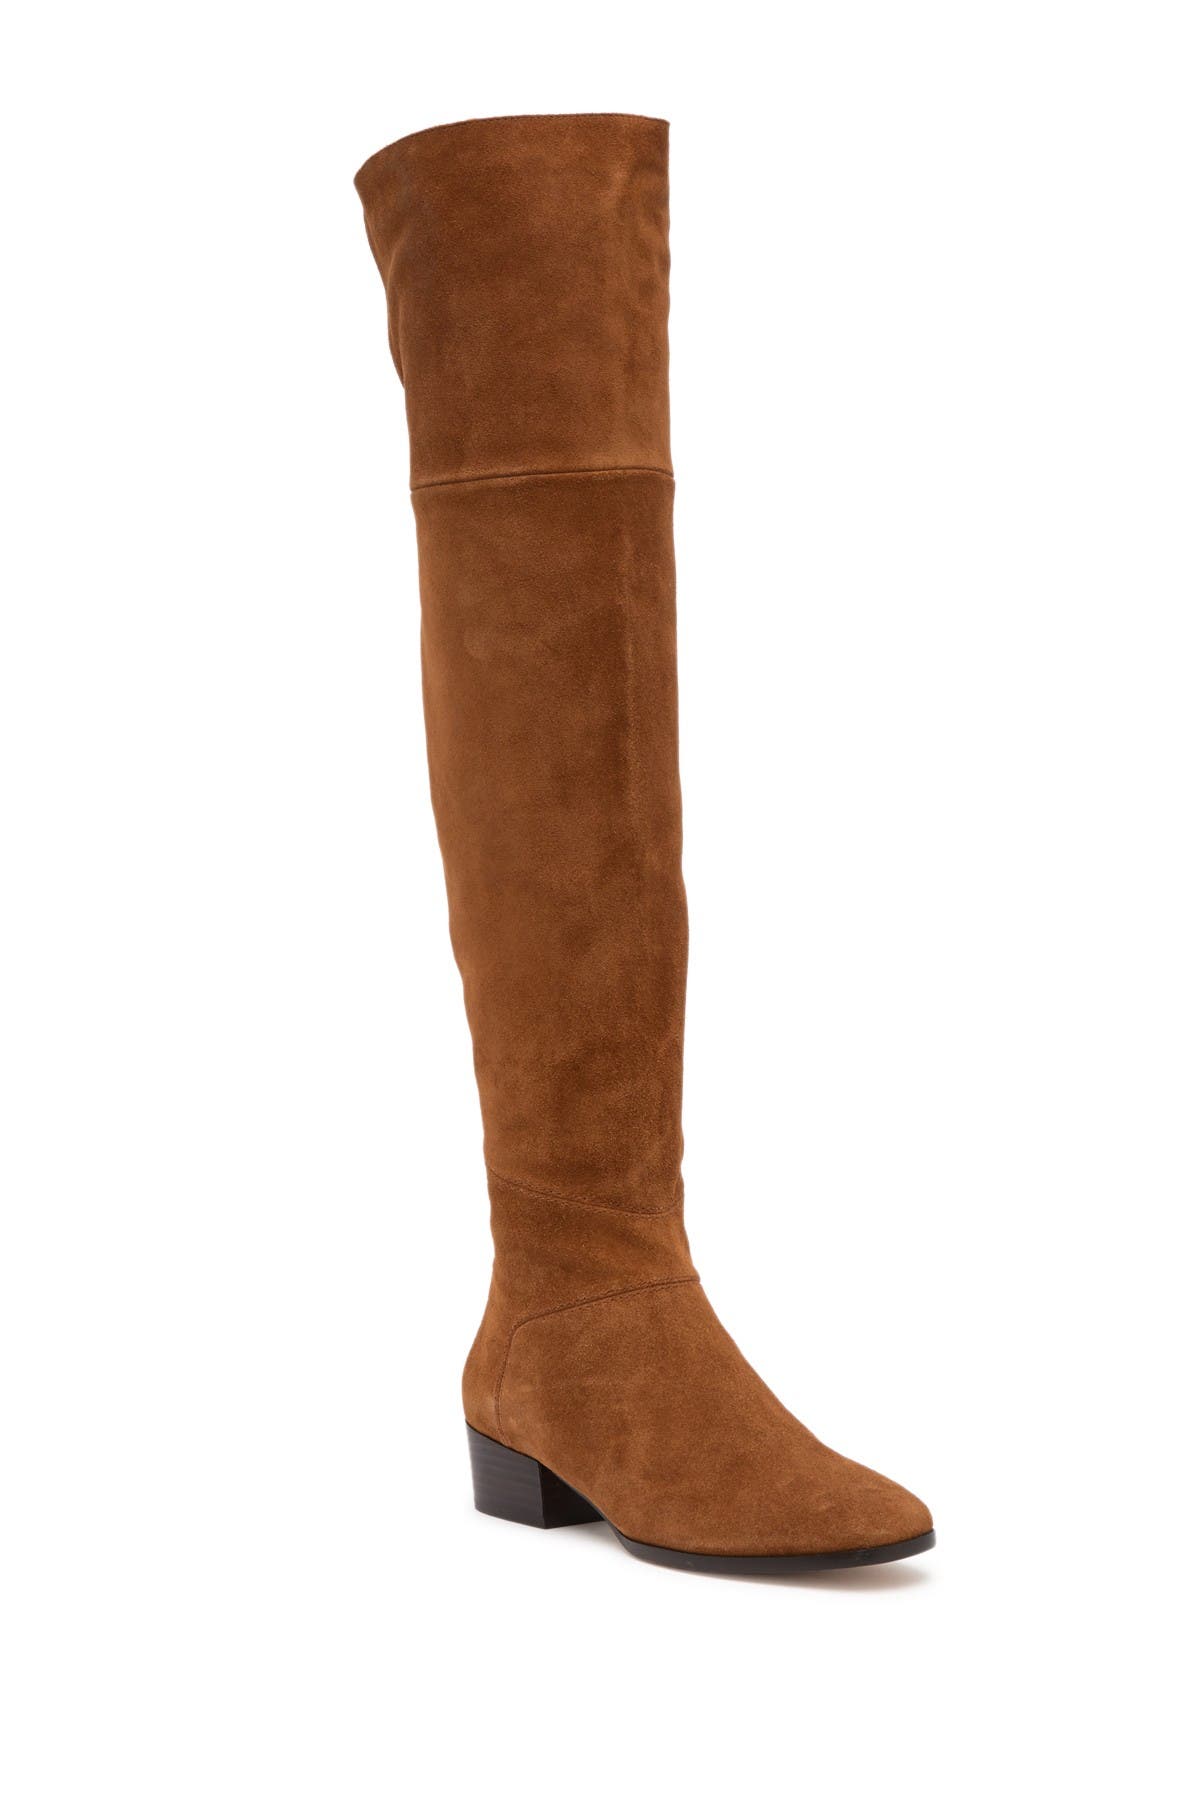 Joie | Reeve Over-the-Knee Boot 